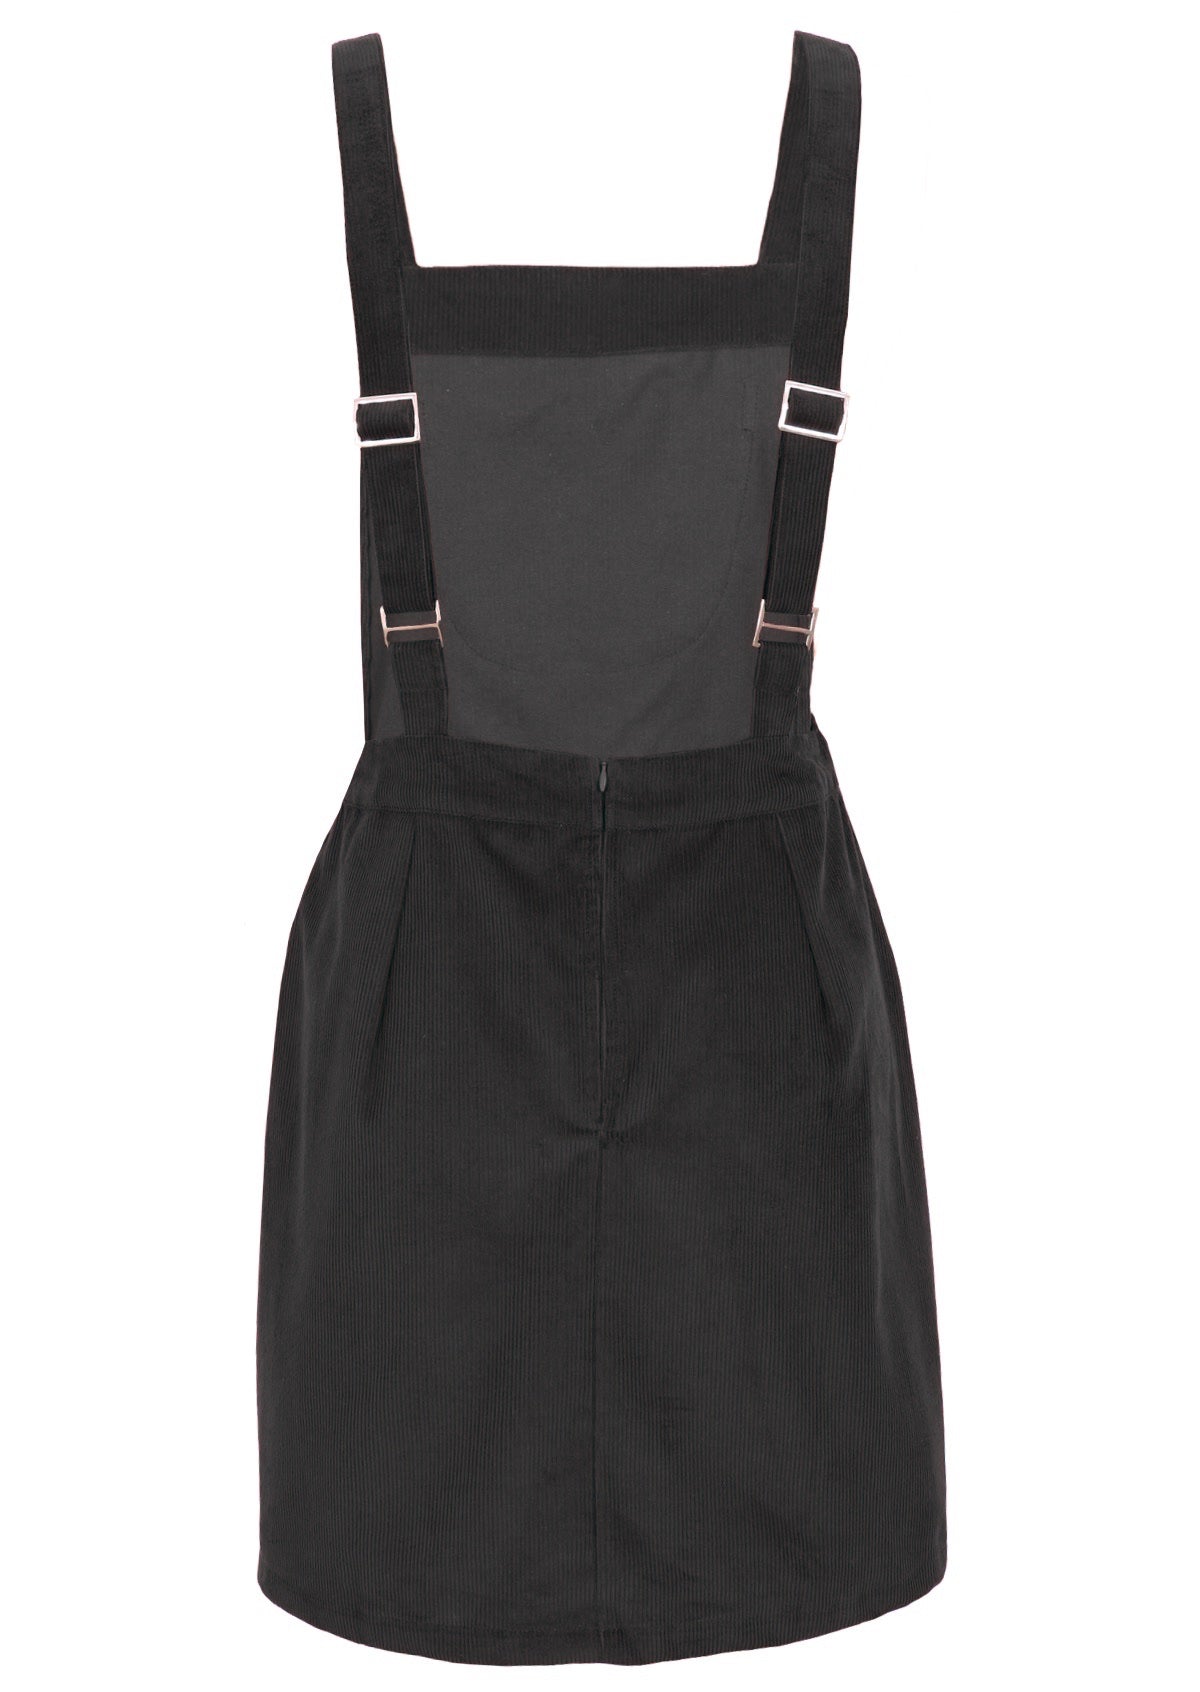 Grey cotton pinafore ends above the knee. 